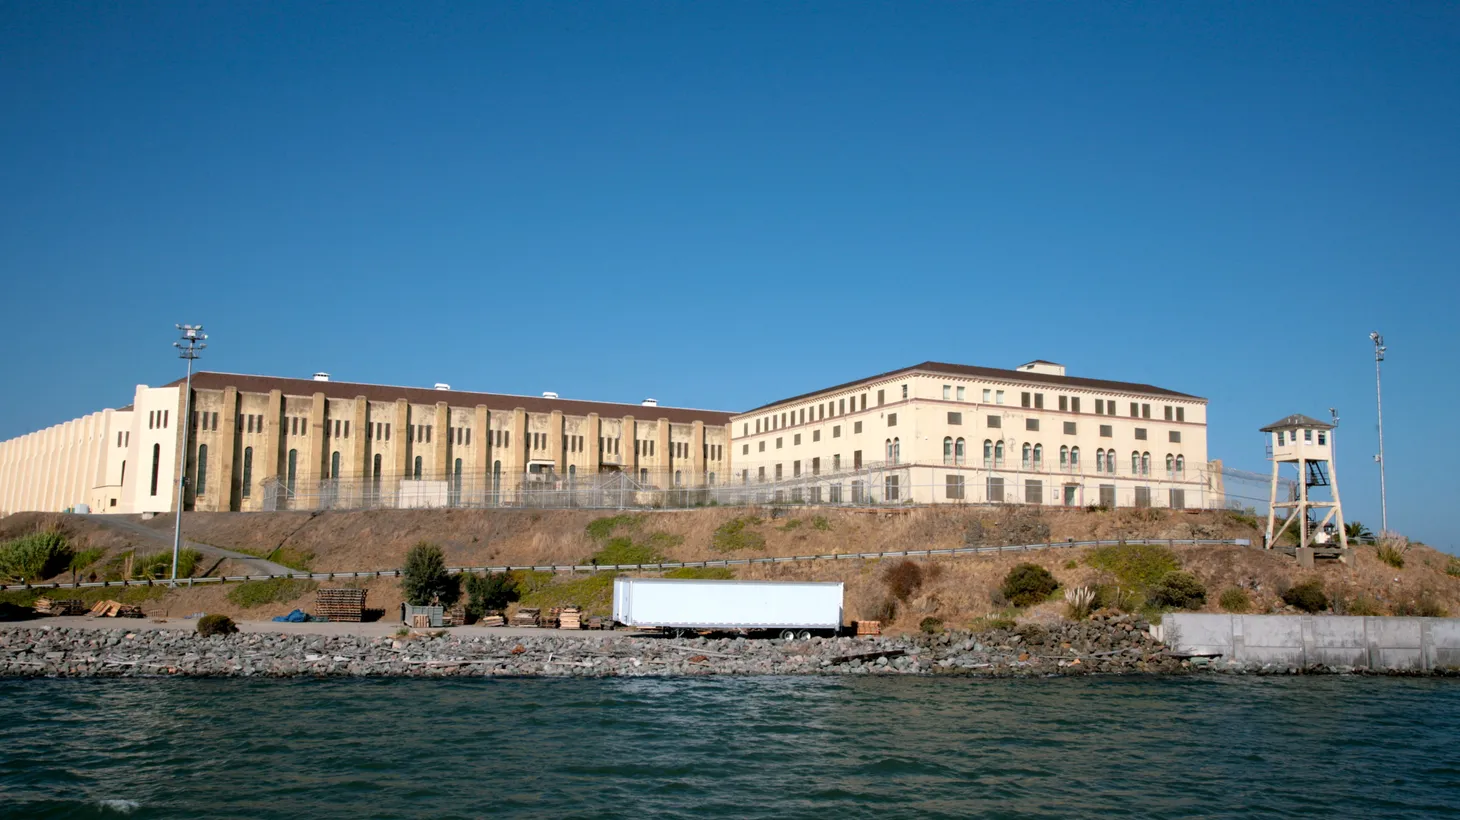 San Quentin State Penitentiary in Northern California is where Watson “Al” Allison spent nearly 30 years on death row.